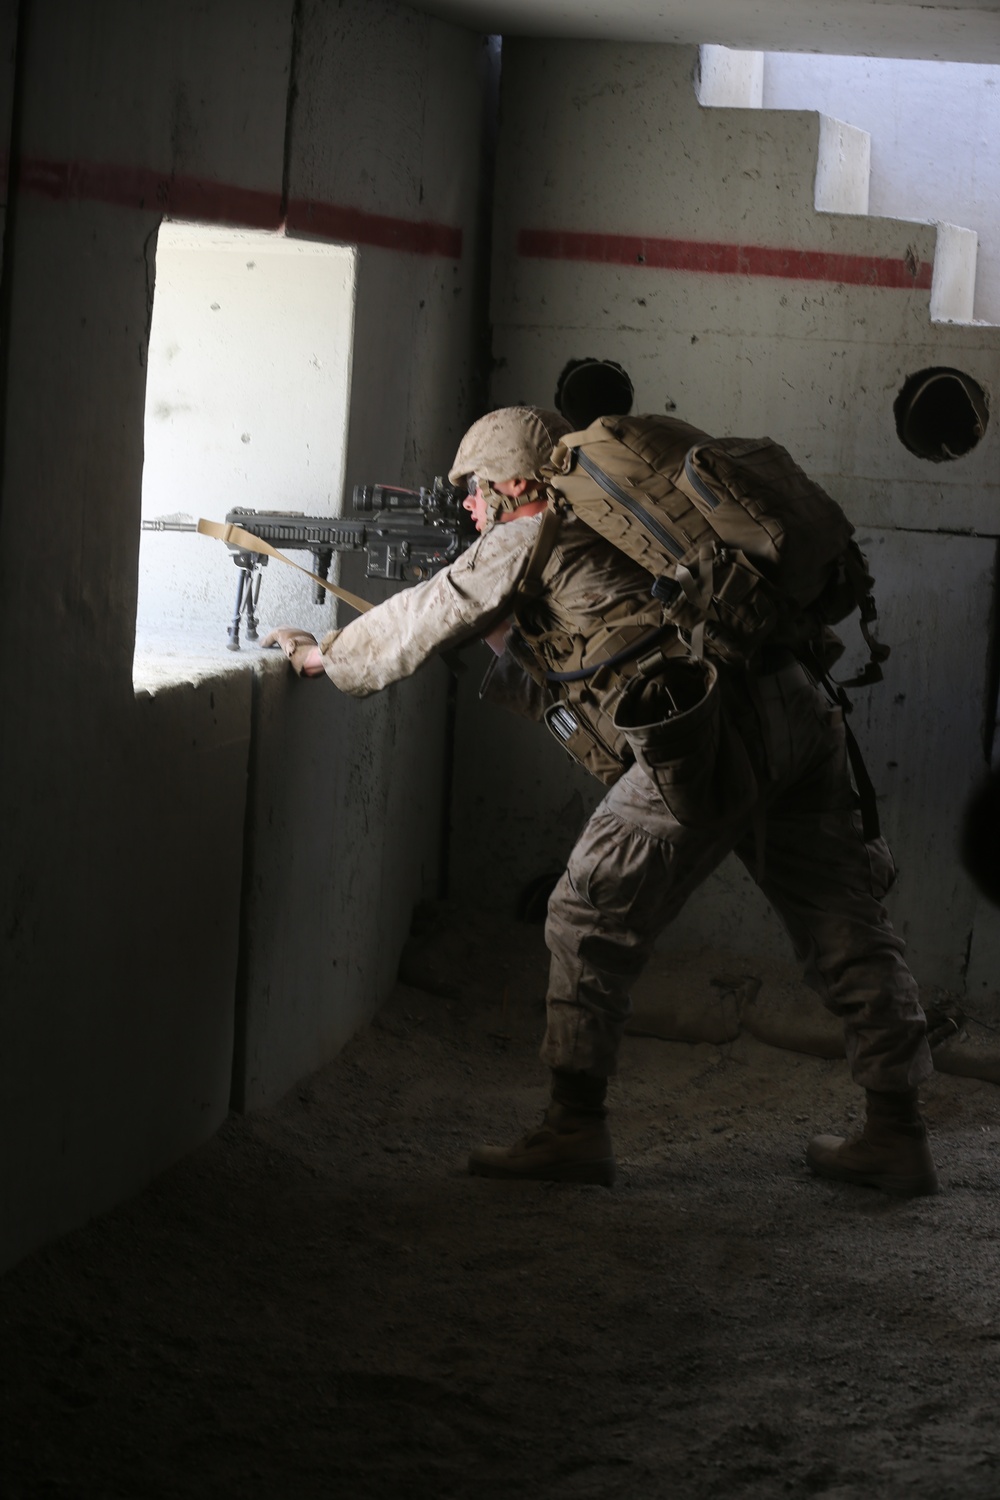 Marines utilize shock-absorbing concrete during live fire training